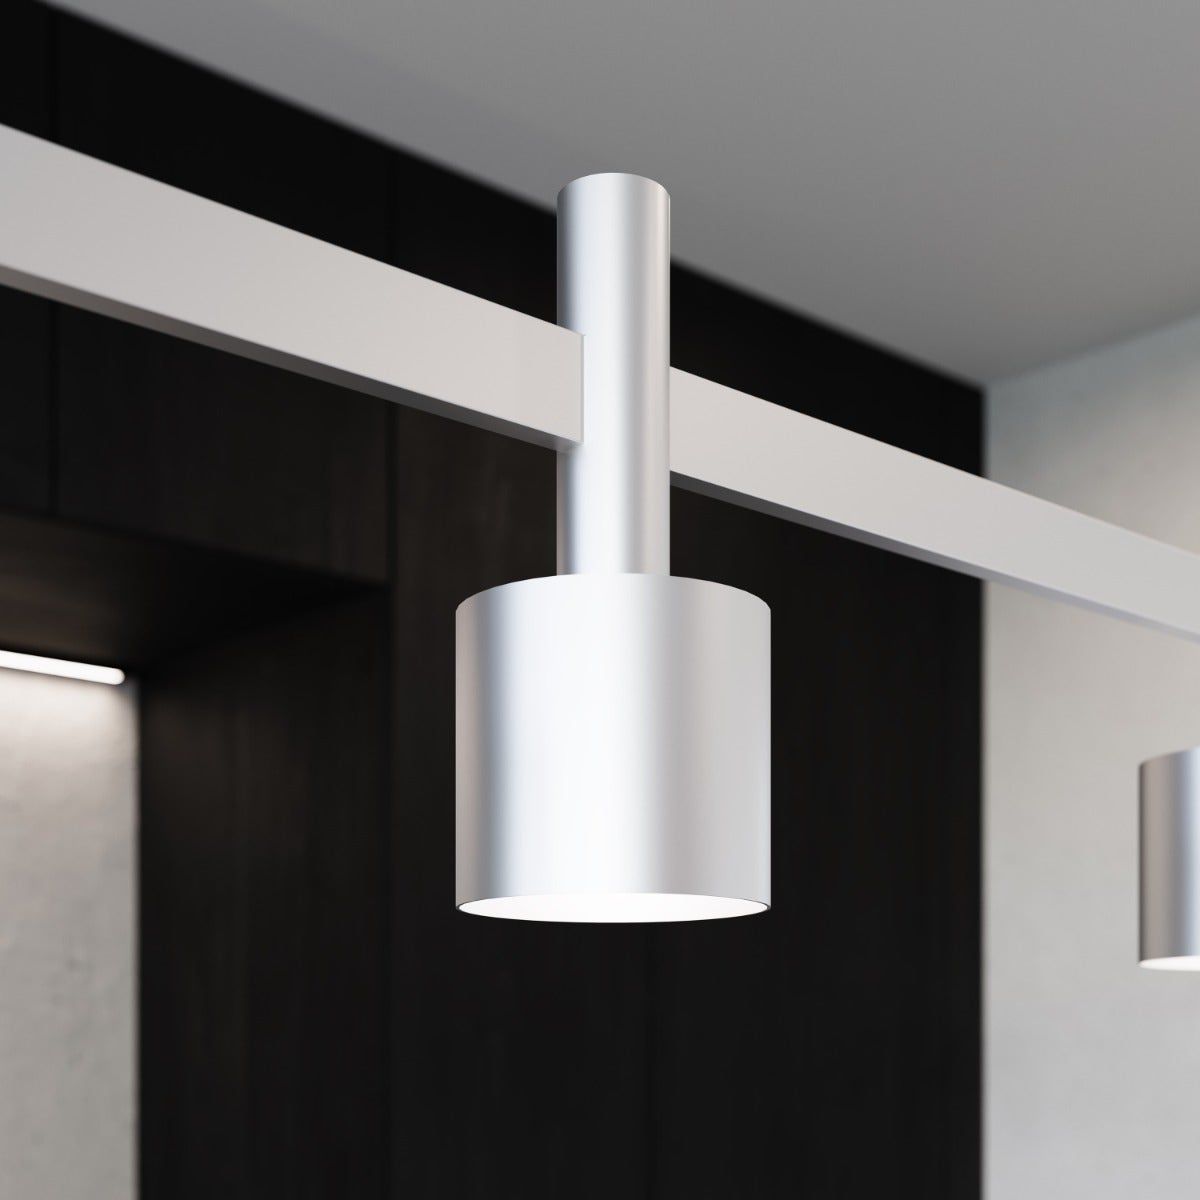 Systema Staccato 5-Light Linear Pendant with Drum Shades